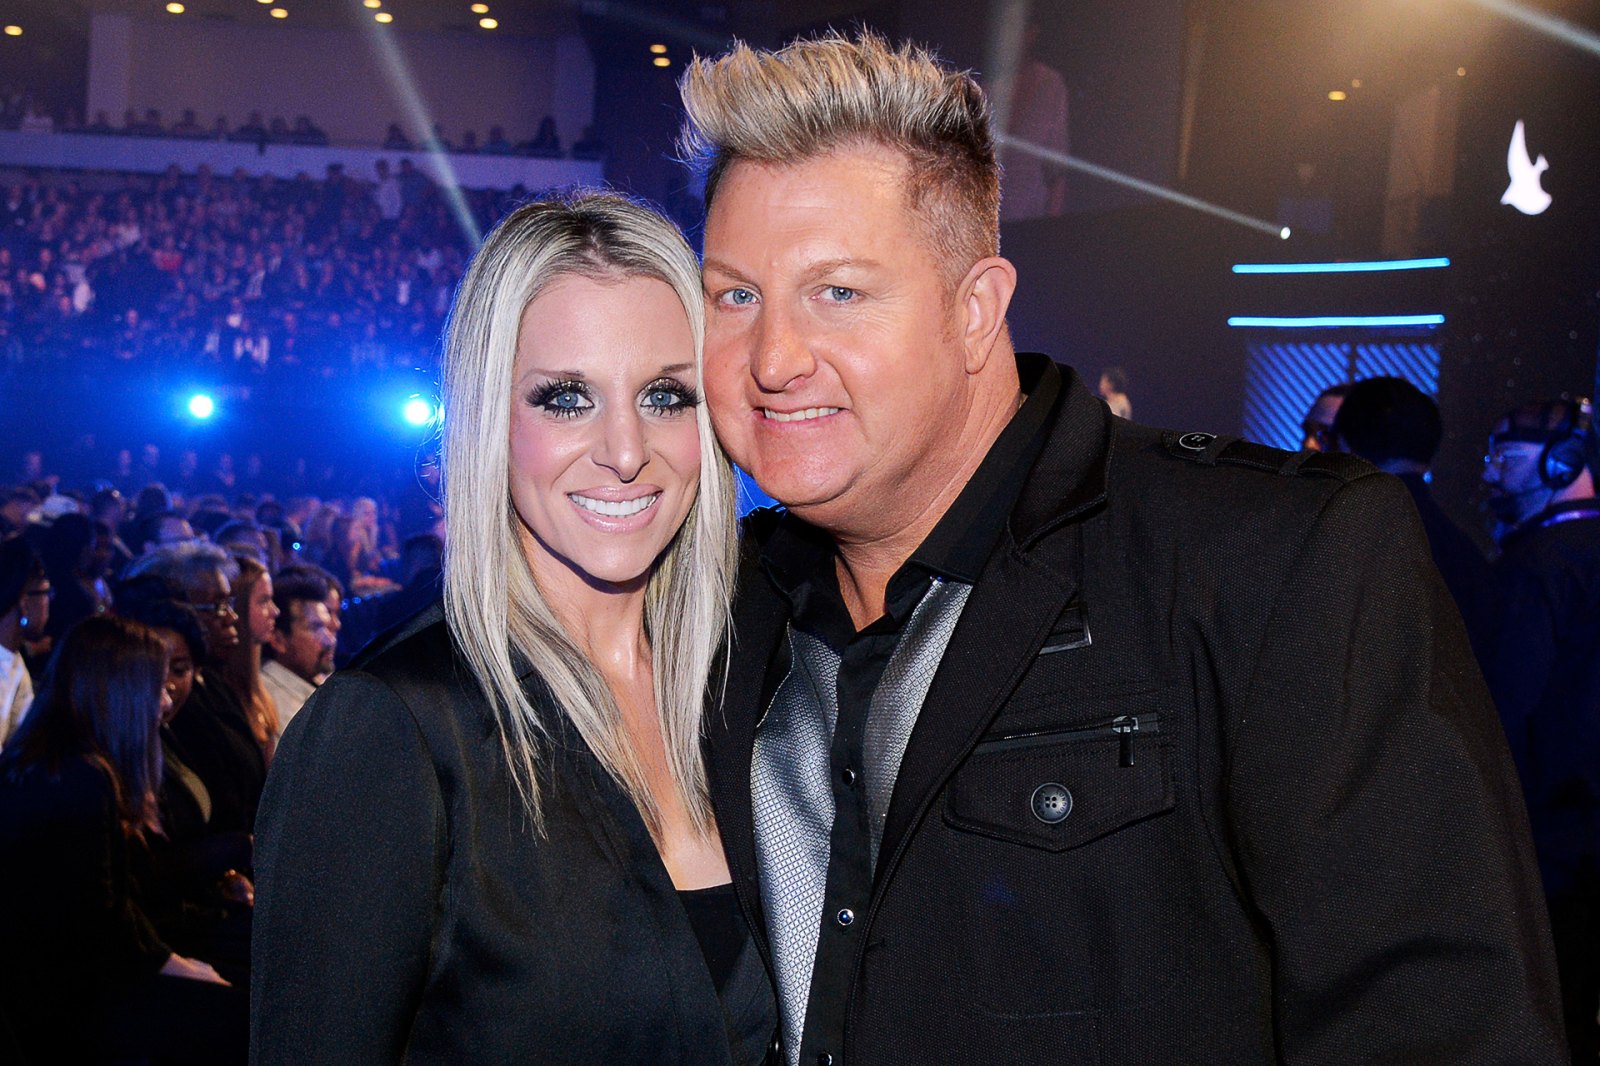 Rascal Flatts’ Gary LeVox Shares the Secret to 20-Year Marriage to Wife Tara- We Keep 'God in the Center' at the 49TH Annual Dove Awards, Show, Nashville, USA - 16 Oct 2018